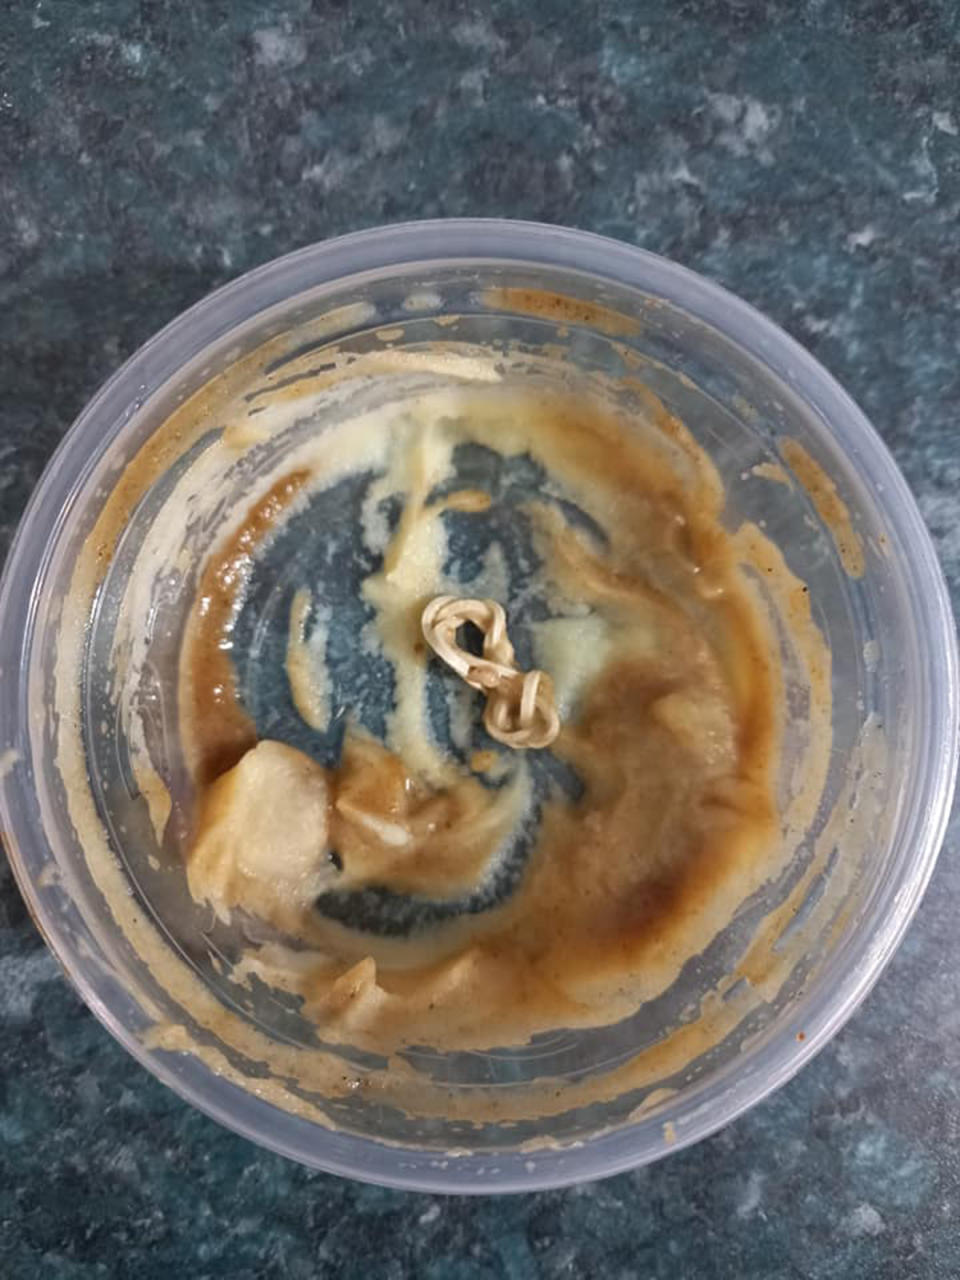 A KFC mash and gravy tub with an elastic band at the bottom.